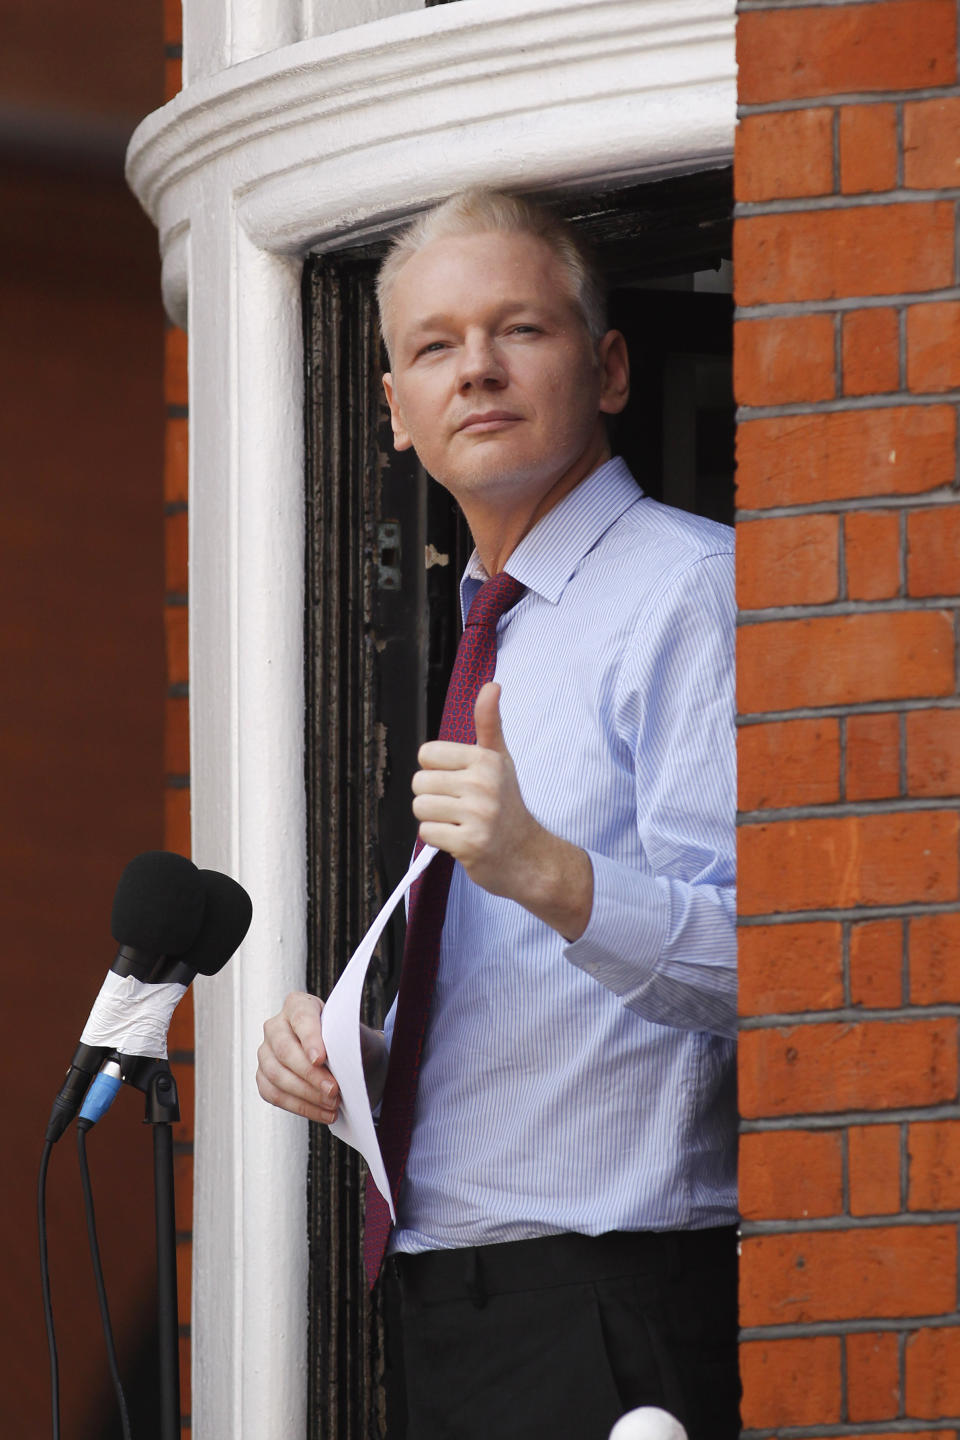 FILE - In this Sunday, Aug. 19, 2012 file photo, WikiLeaks founder Julian Assange gestures as he appears at a window of Ecuadorian Embassy in central London to make a statement to the media and supporters. Police in London arrested WikiLeaks founder Assange at the Ecuadorean embassy Thursday, April 11, 2019 for failing to surrender to the court in 2012, shortly after the South American nation revoked his asylum. (AP Photo/Sang Tan, FIle)